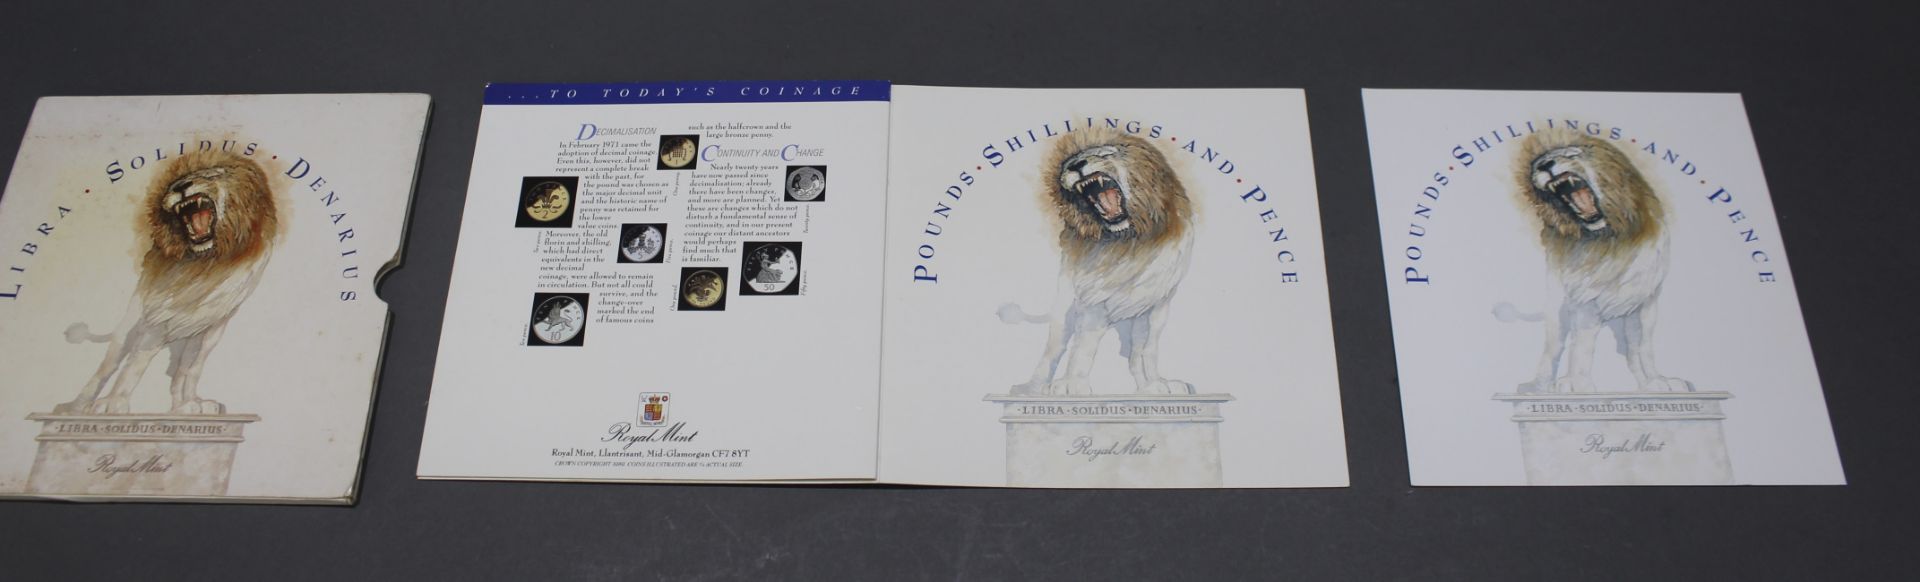 Royal Mint Pounds Shillings and Pence Proof Coin Set - Image 9 of 10